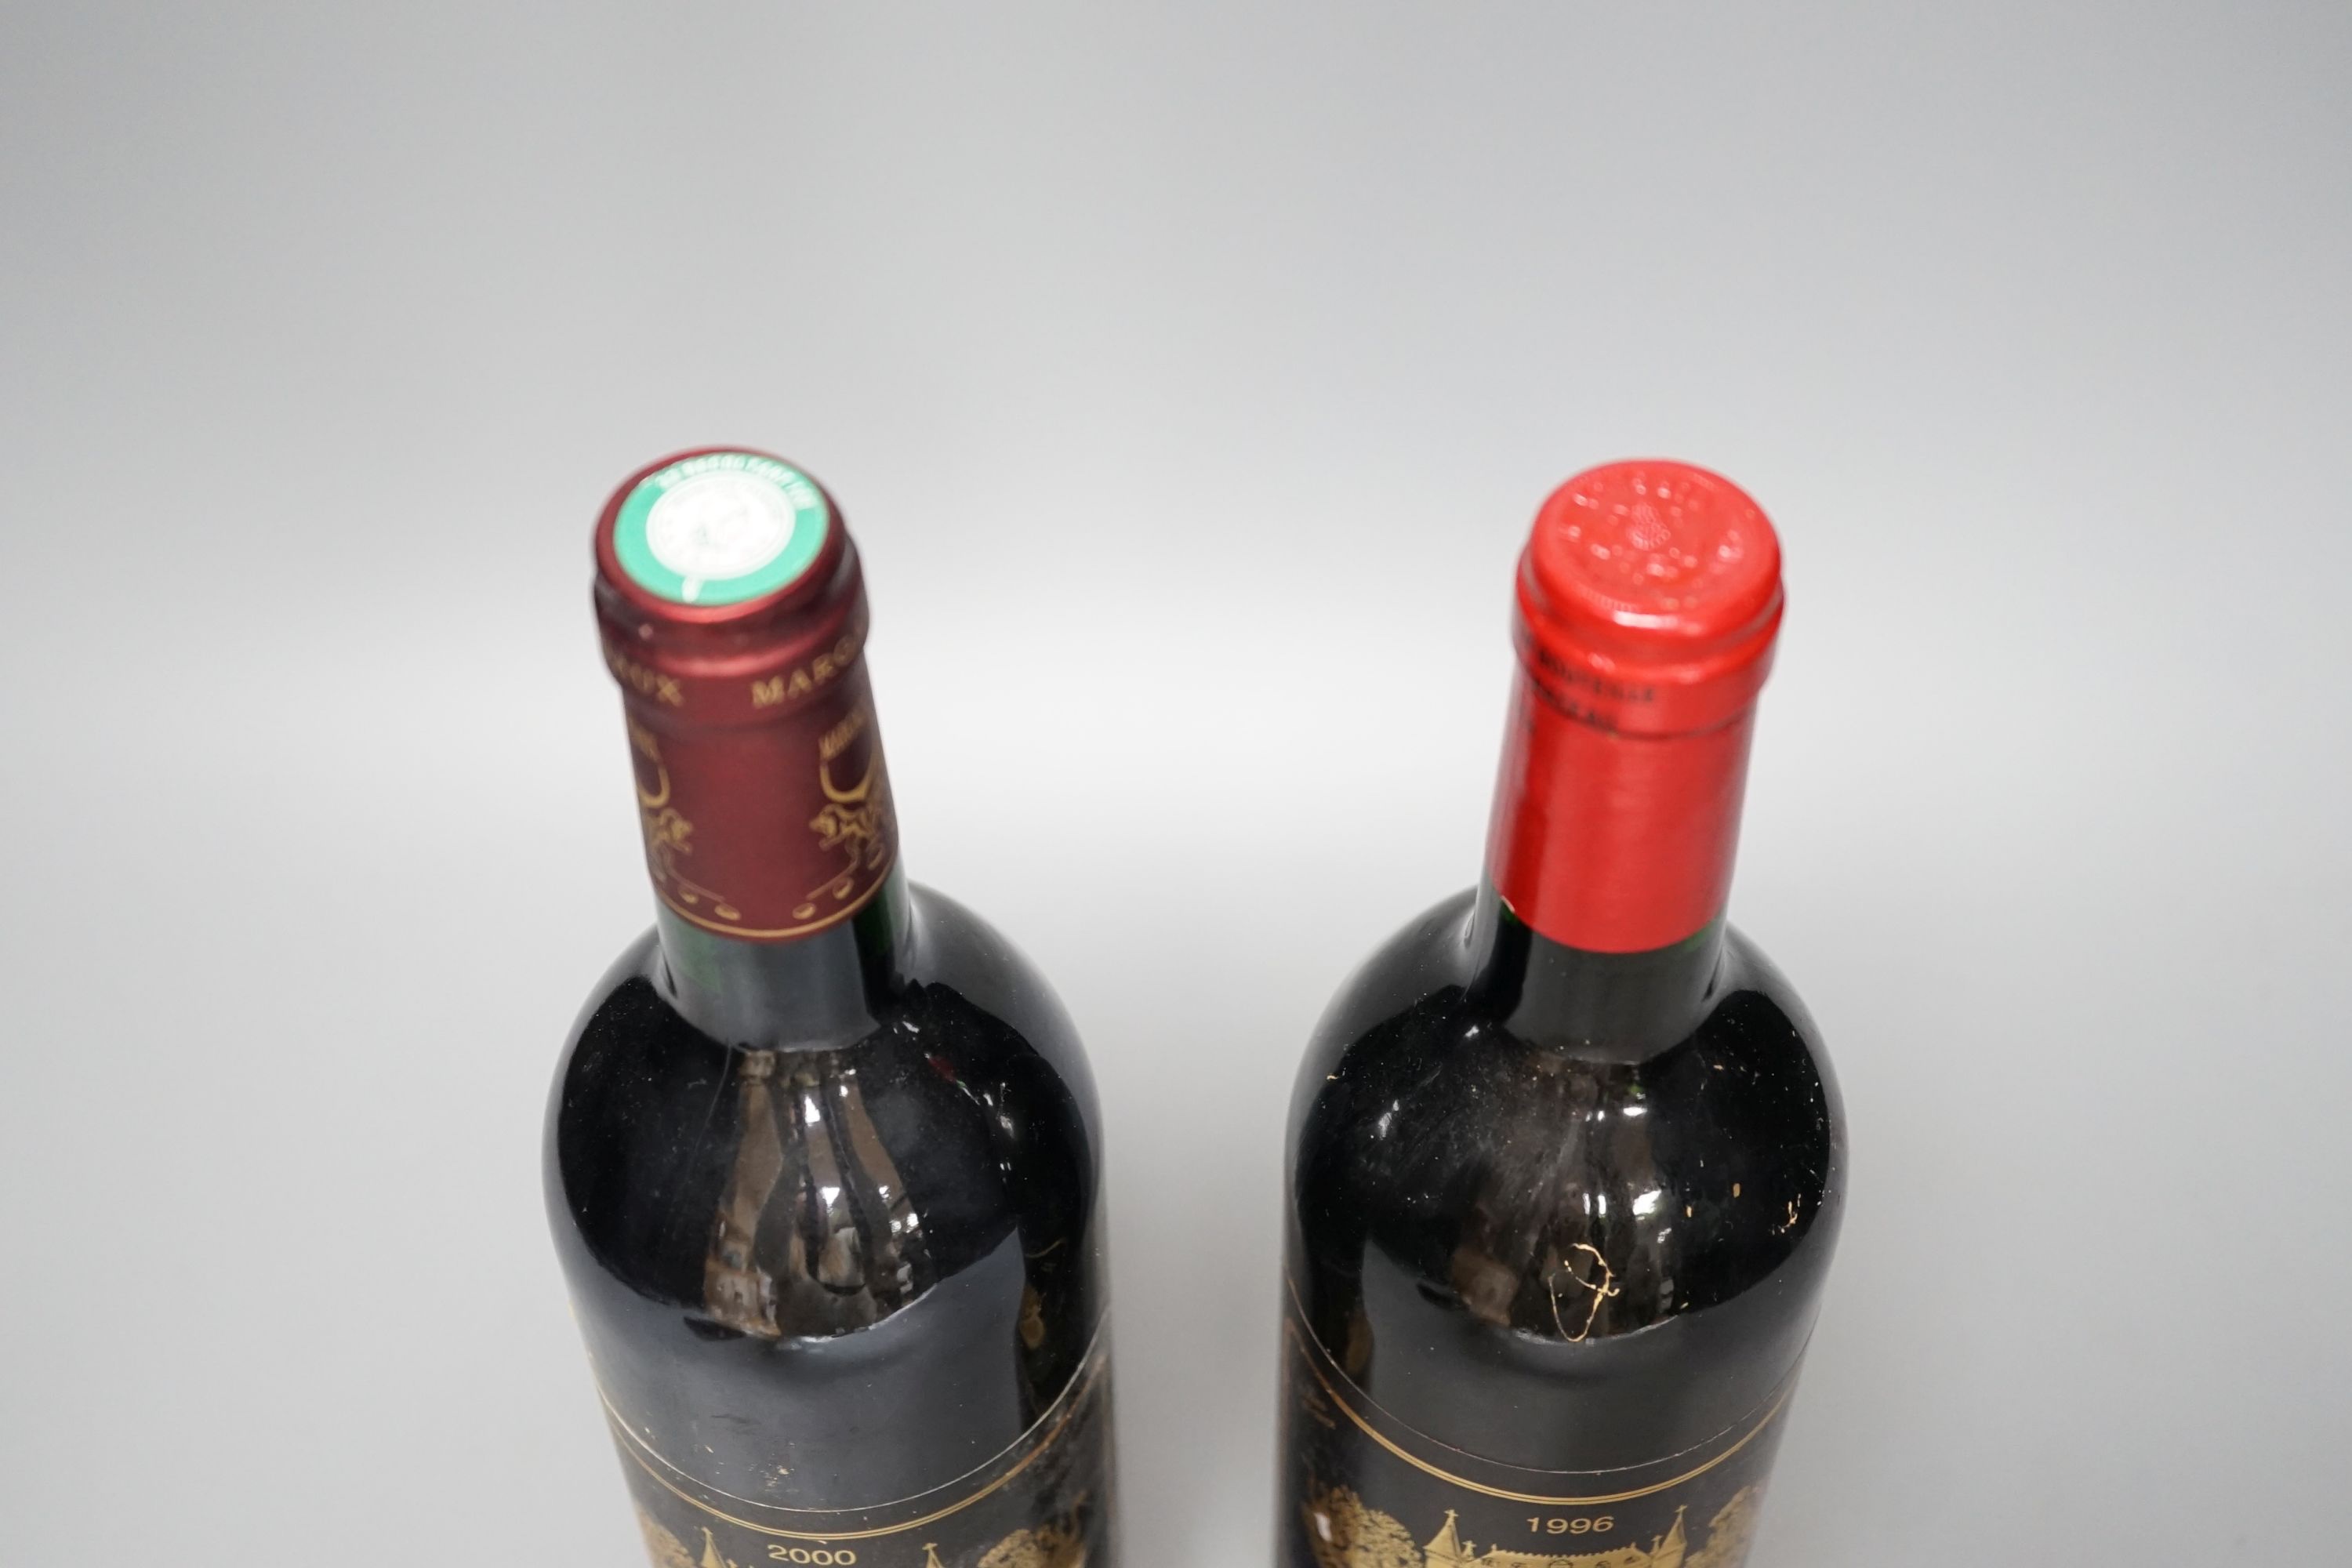 Chateau Palmer Margaux Medoc - 2 bottles, 1996 and 2000